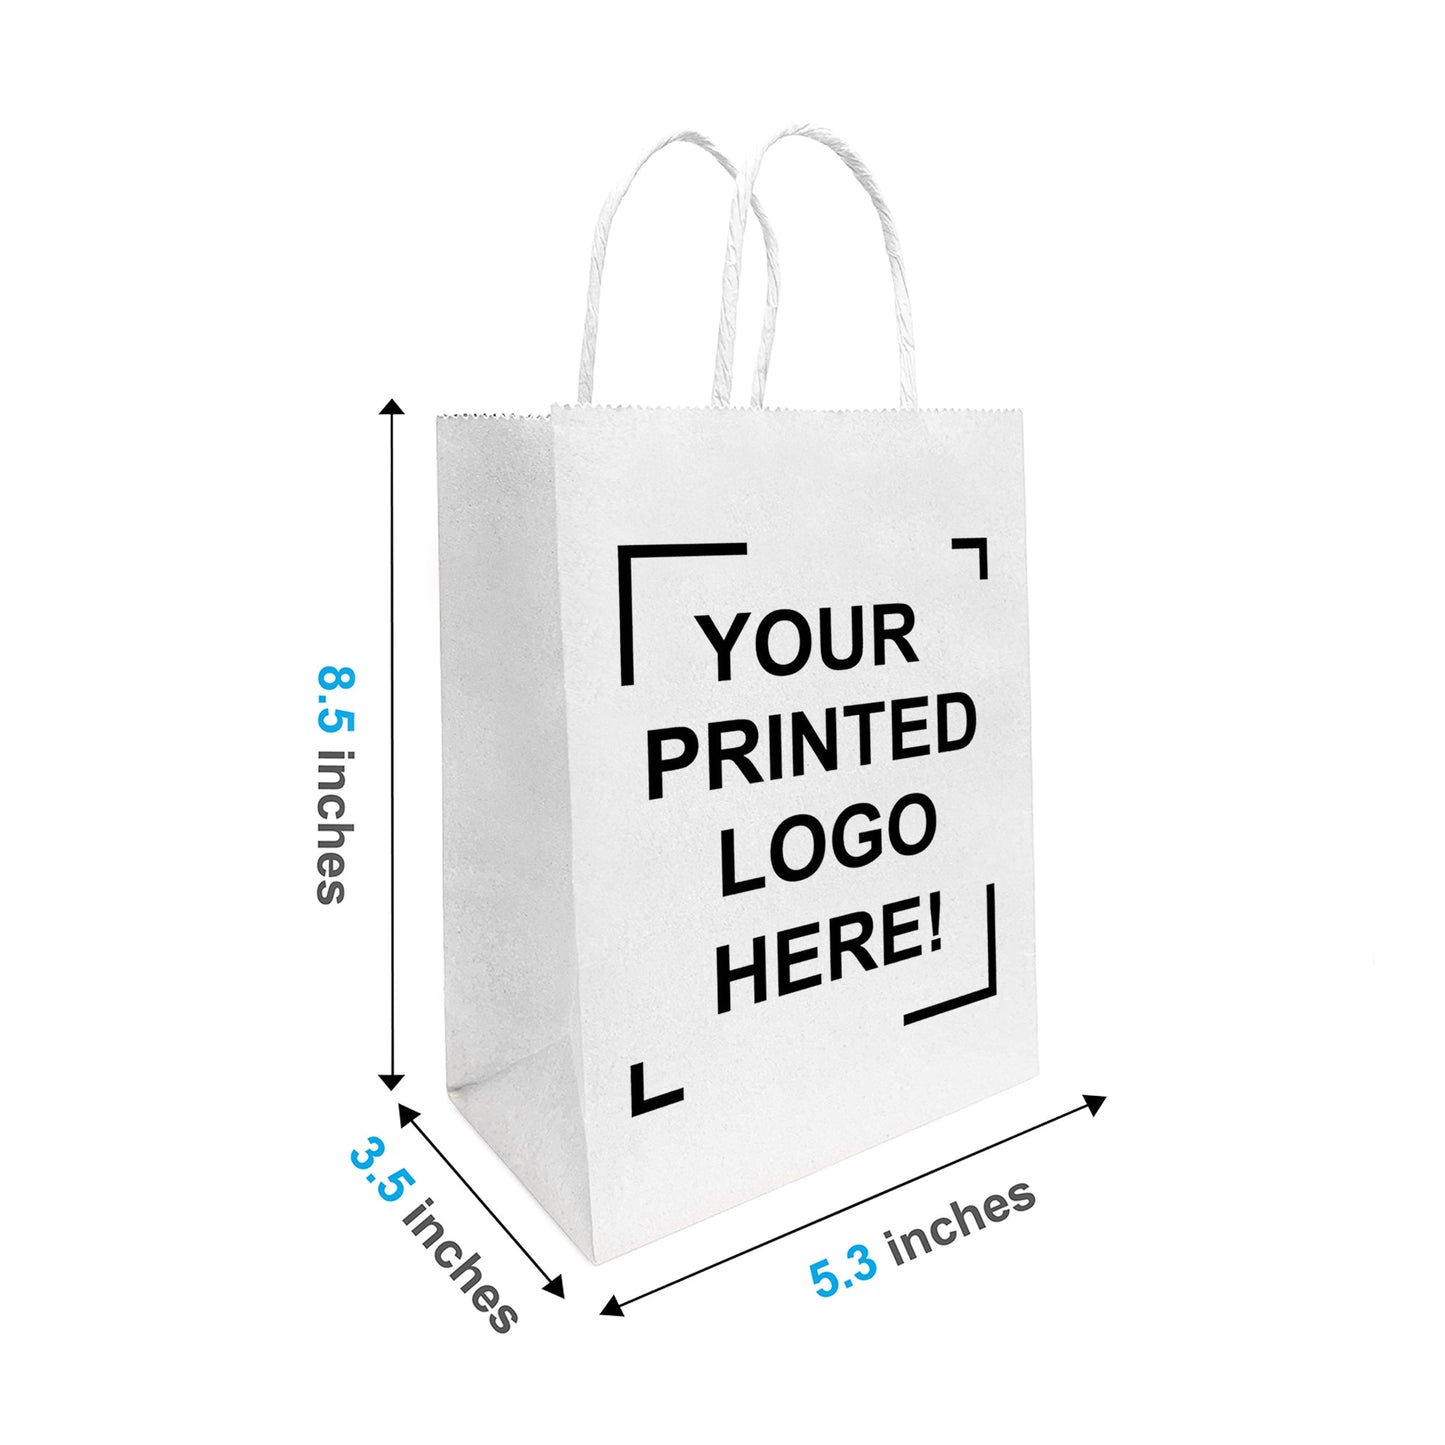 100 Pcs, Gem, 5.3x3.5x8.5 inches, White Kraft Paper Bags, with Twisted Handle, Full Color Custom Print